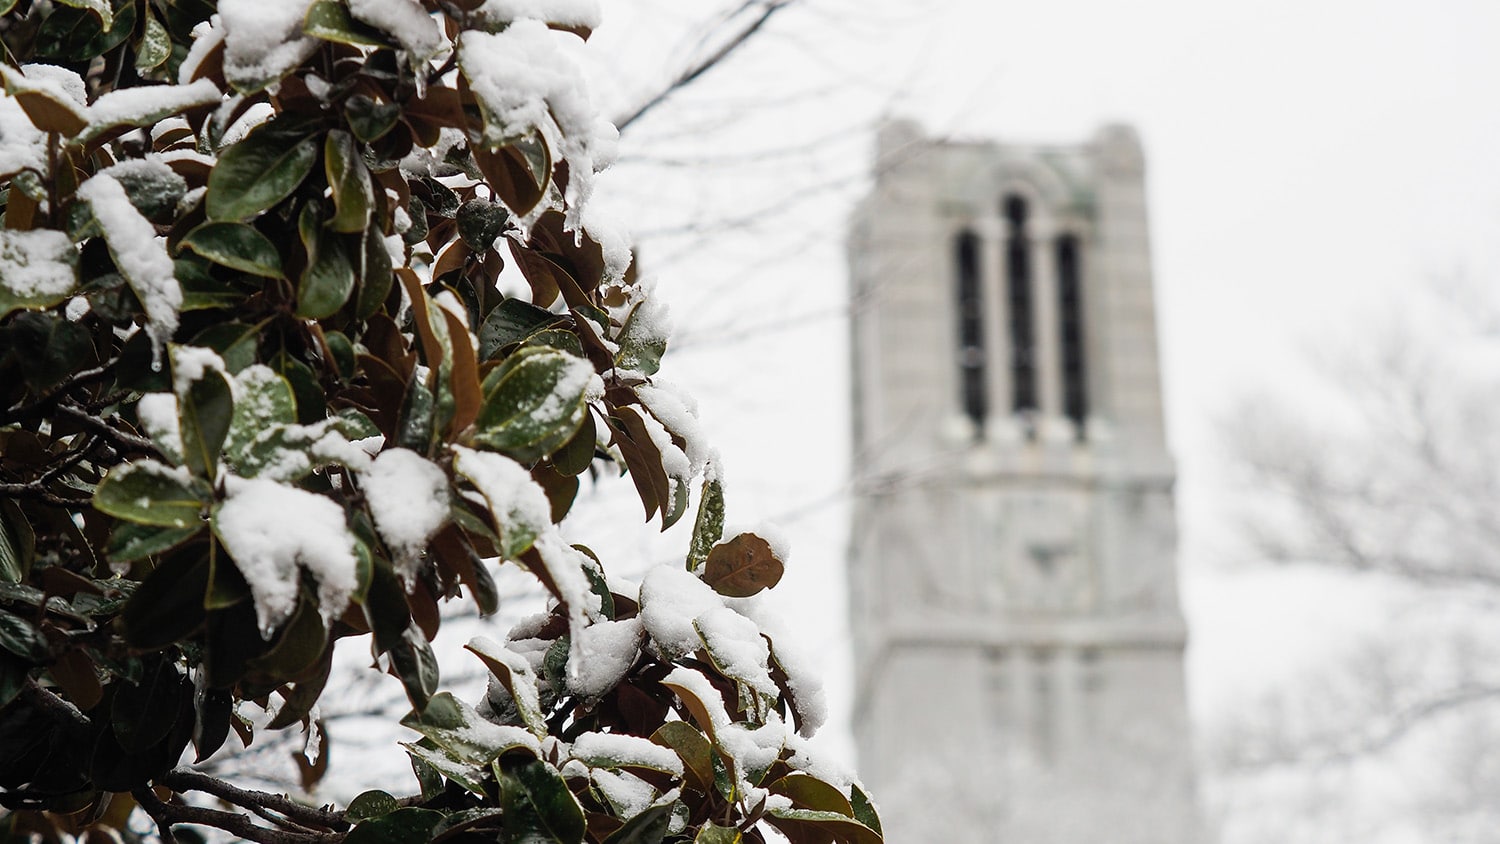 The NC State Memorial Belltower is framed by snow-covered trees.